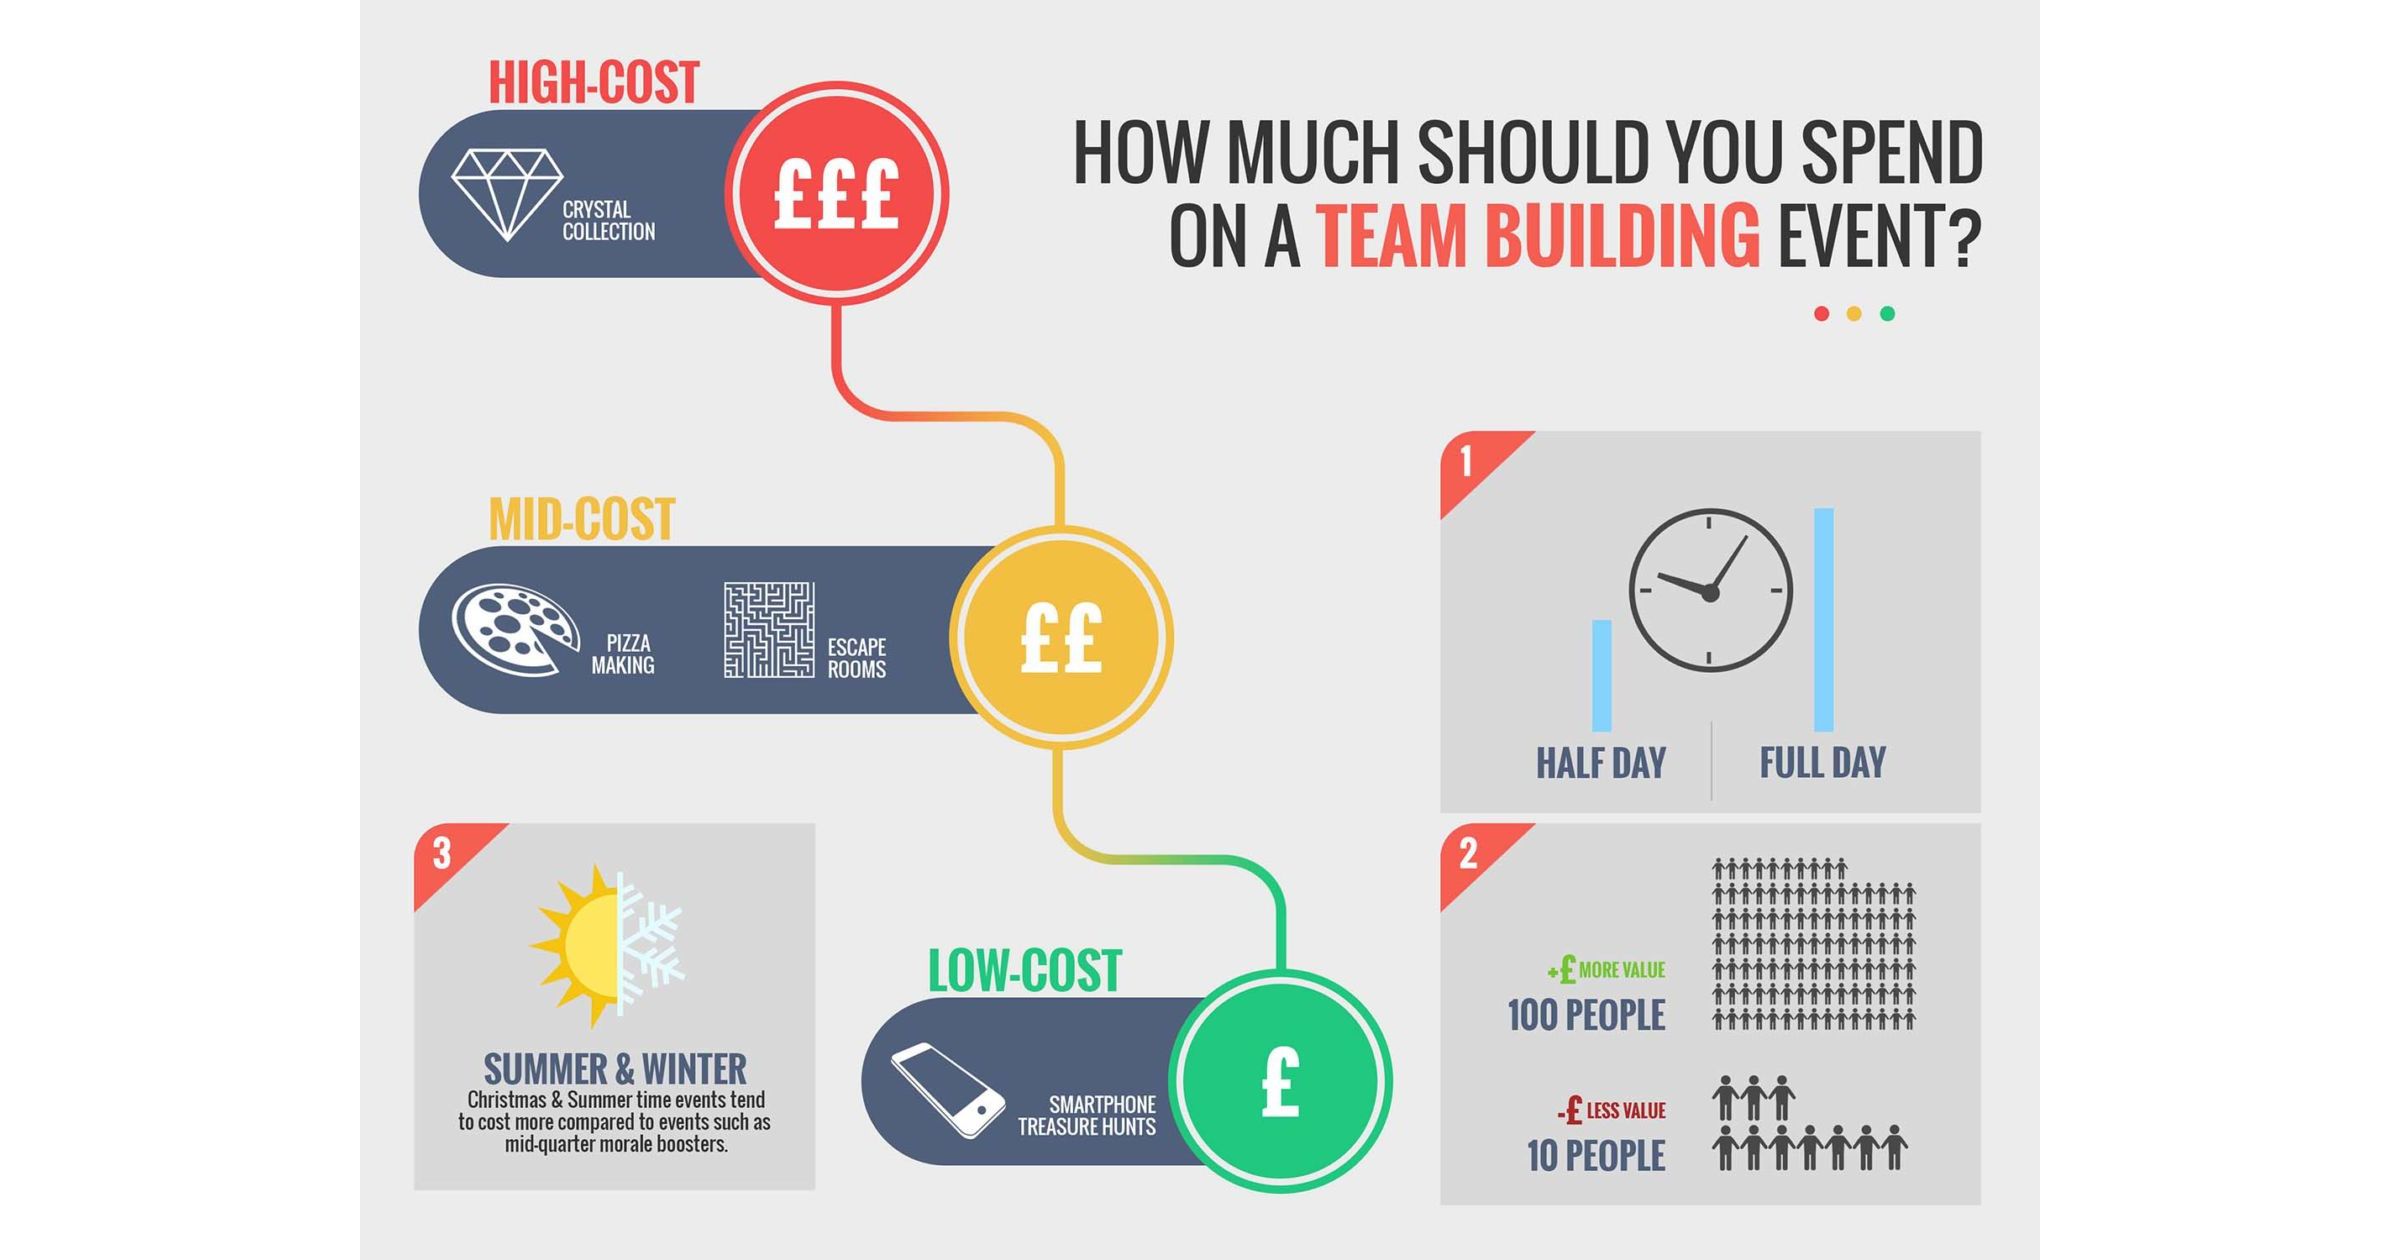 How Much Should You Spend on a Team Building Event?